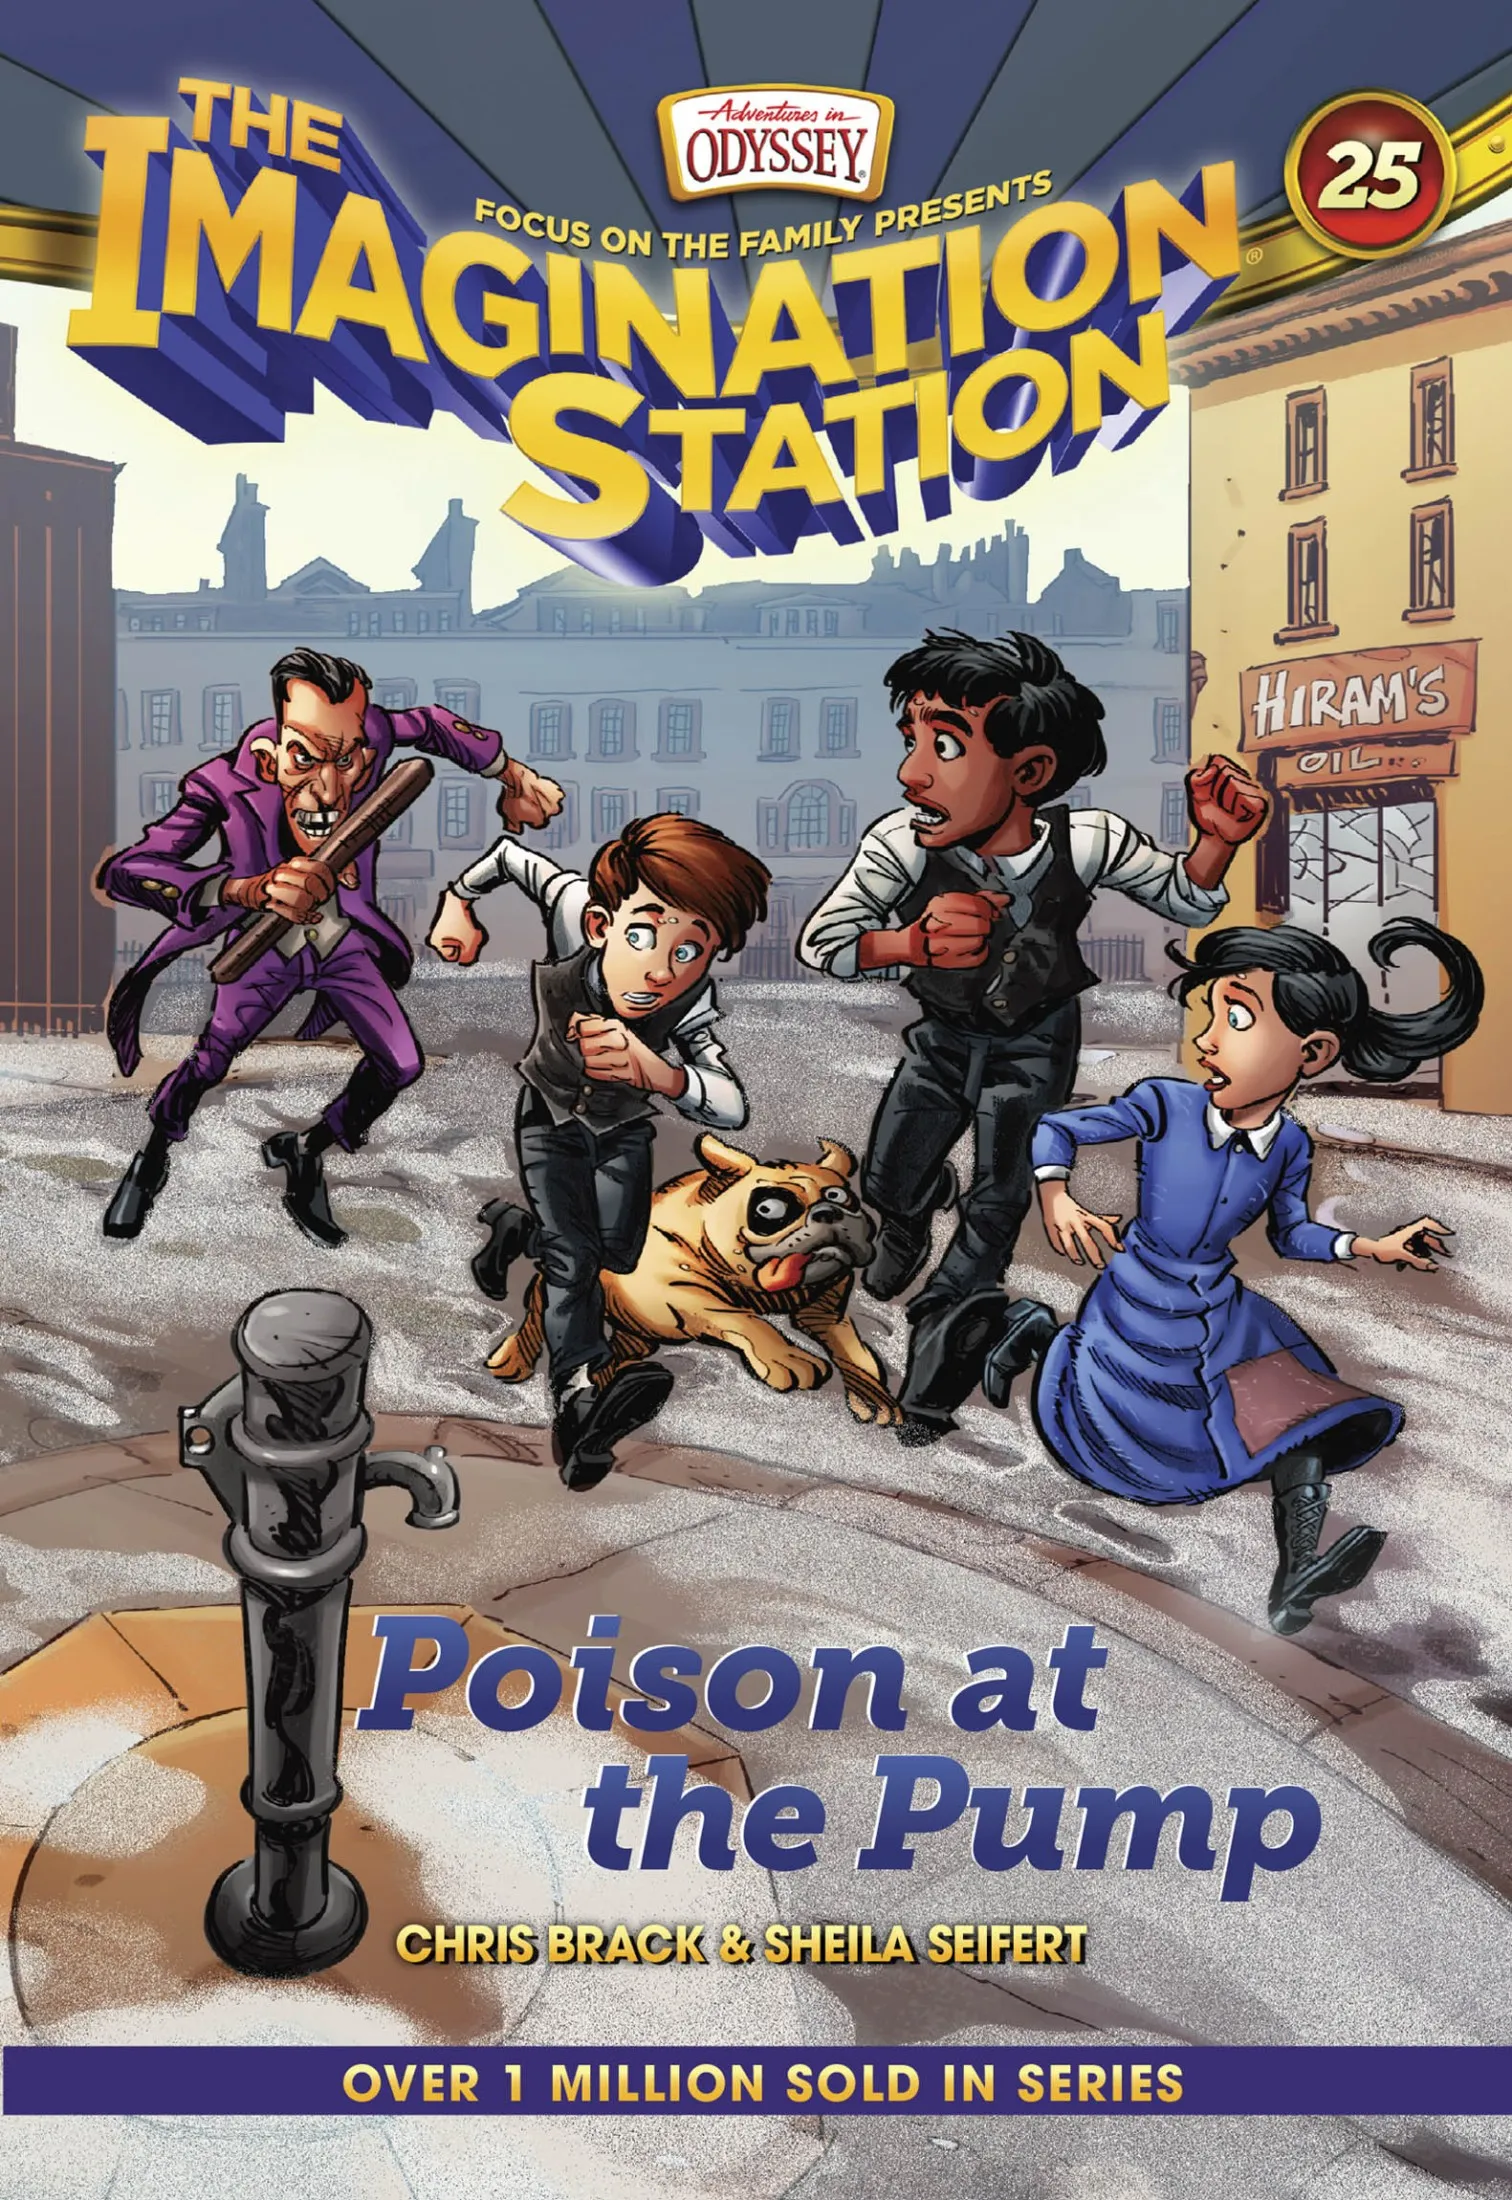 Poison at the Pump (AIO Imagination Station #25)